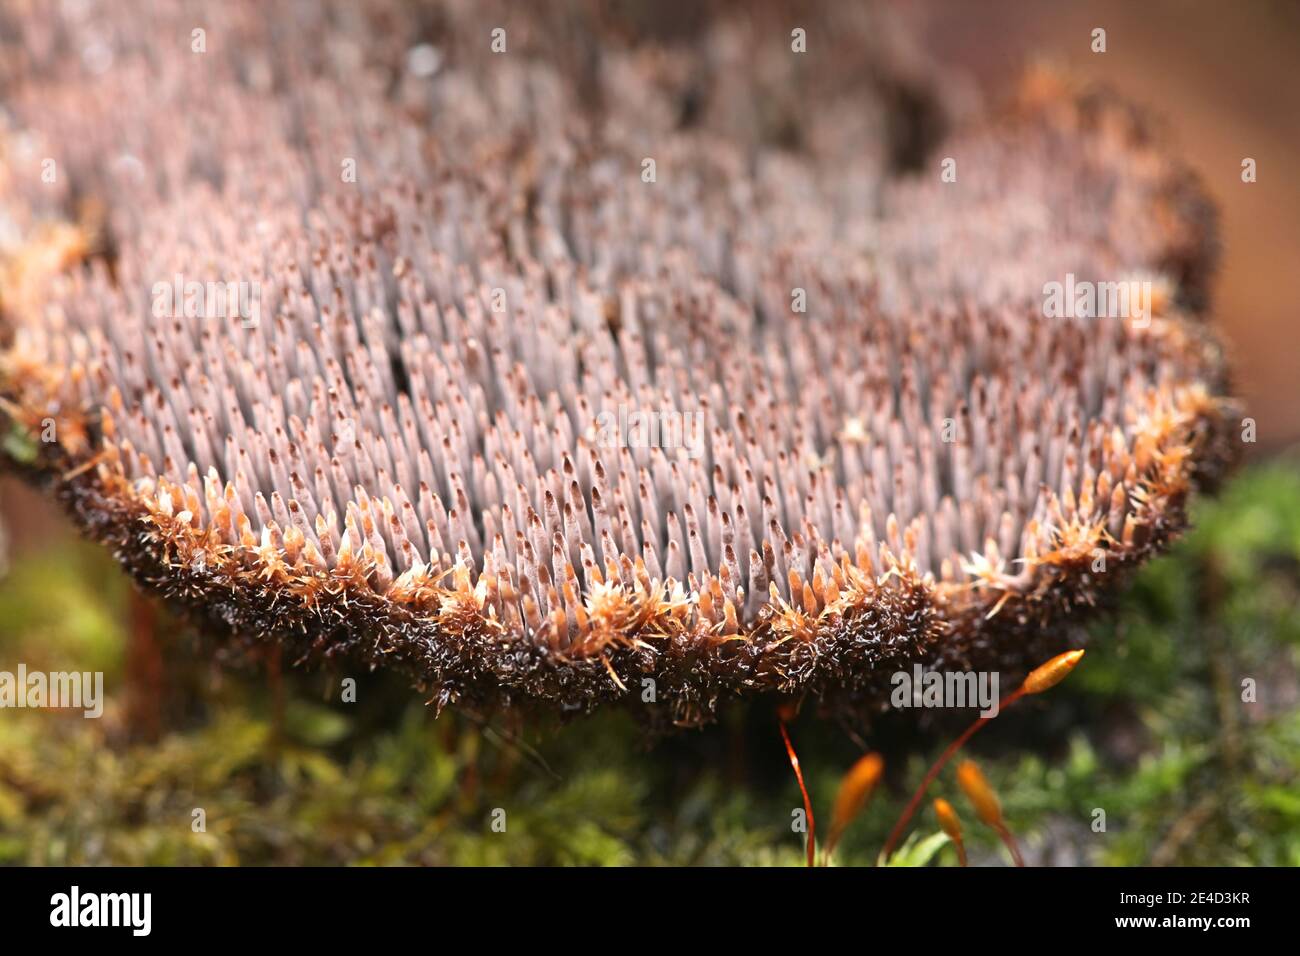 Gloiodon strigosus, a tooth fungus from Finland with no common english name Stock Photo